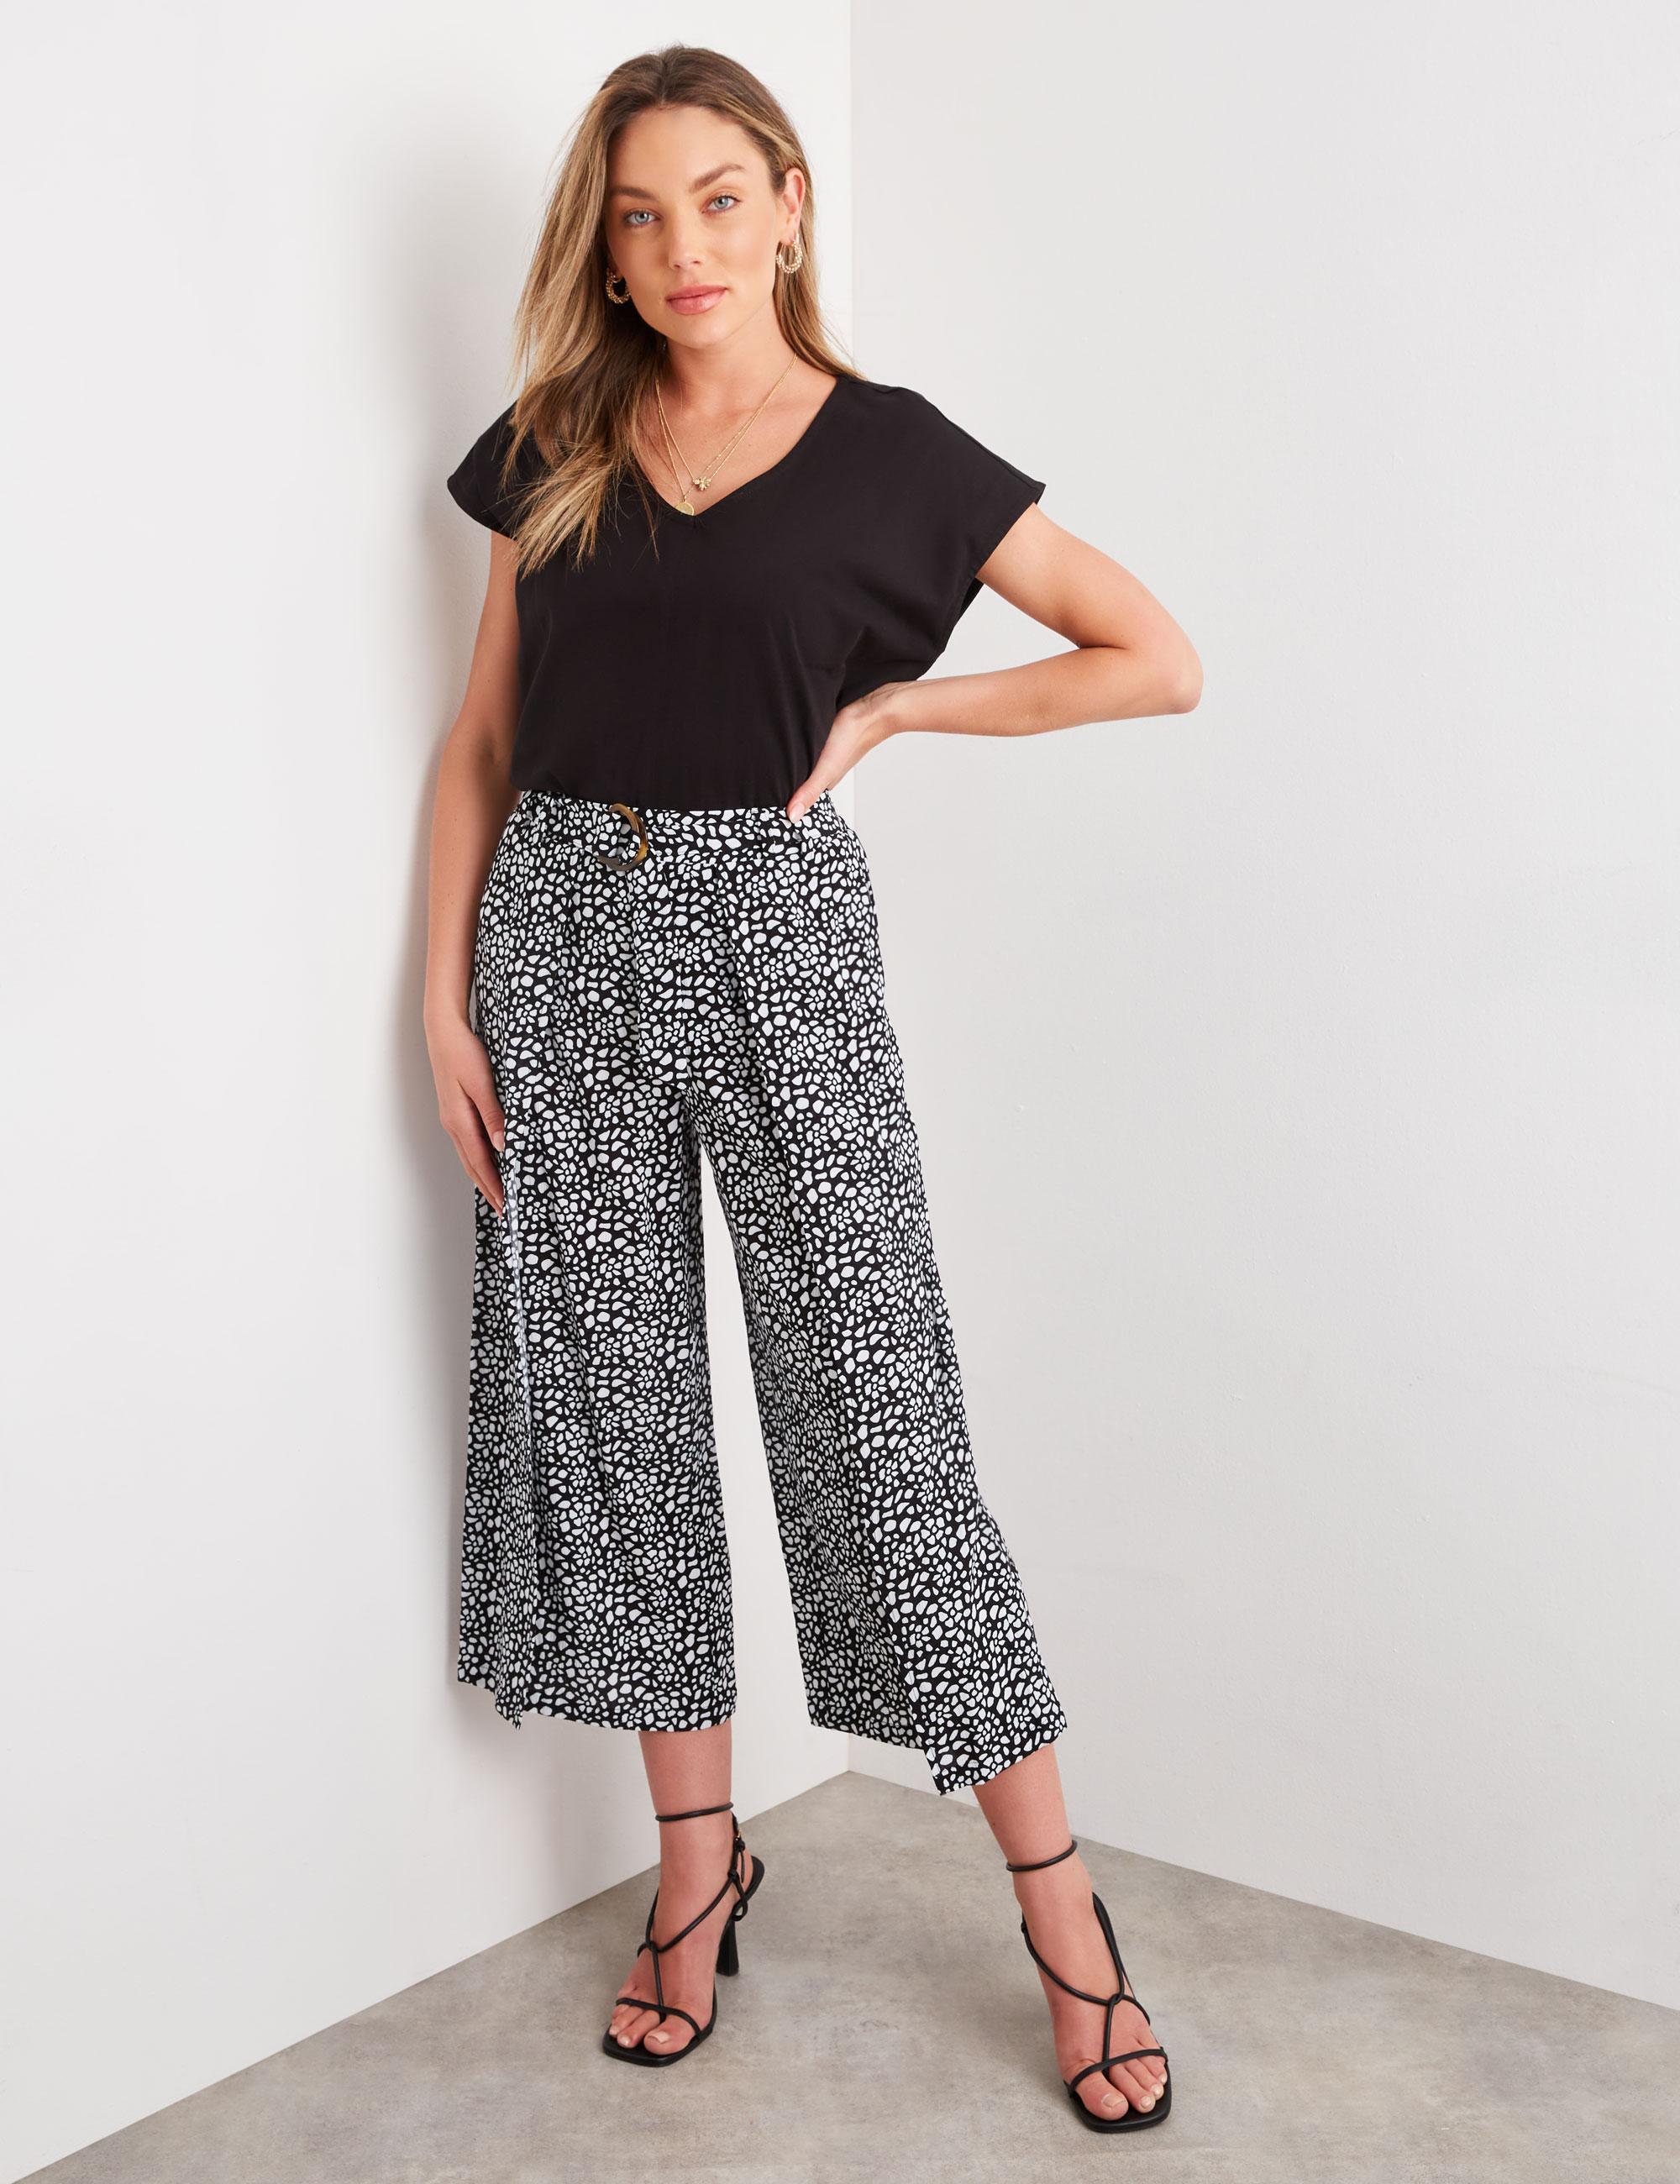 ROCKMANS - Womens Pants - Black Summer Cropped - Wide Leg - Fashion Trousers - Abstract Mono - Faux Wrap - Smart Casual - Work Clothes - Office Wear